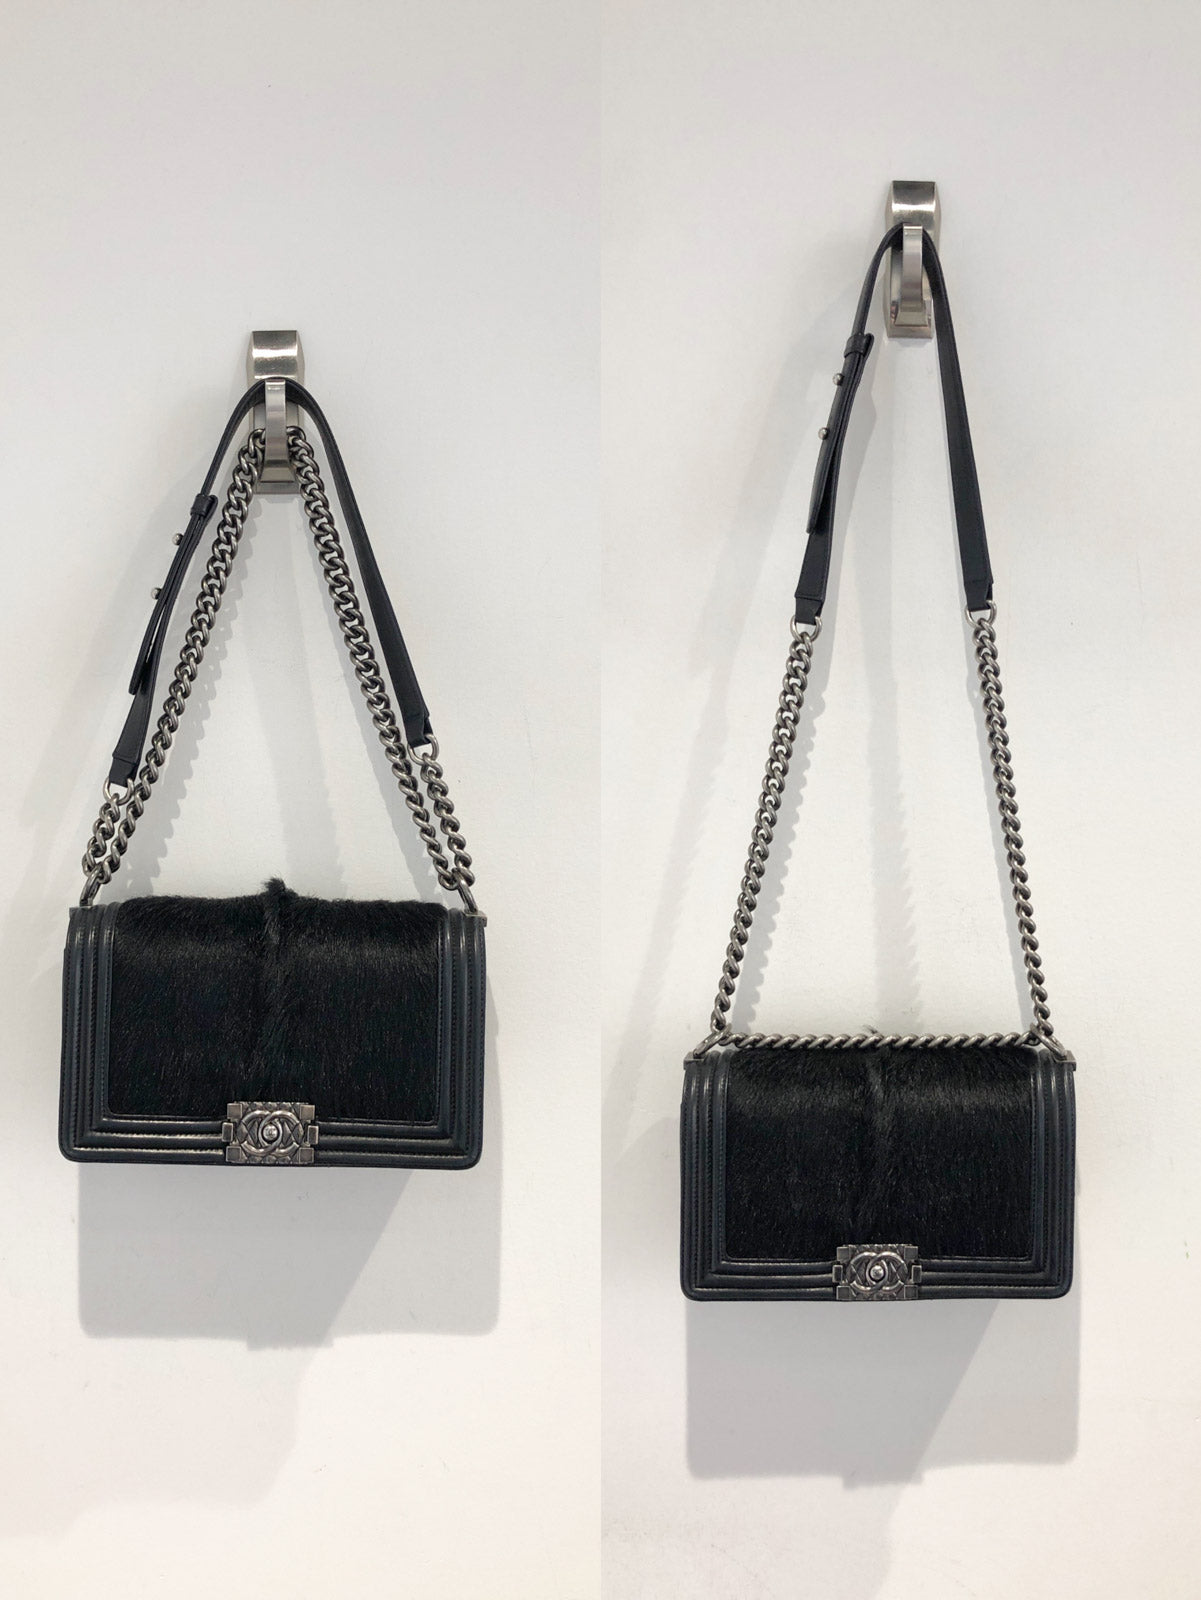 CHANEL HANDBAG COMPARISON & REVIEW : THE CHANEL BOY BAG AND THE CHANEL  CLASSIC FLAP BAG 